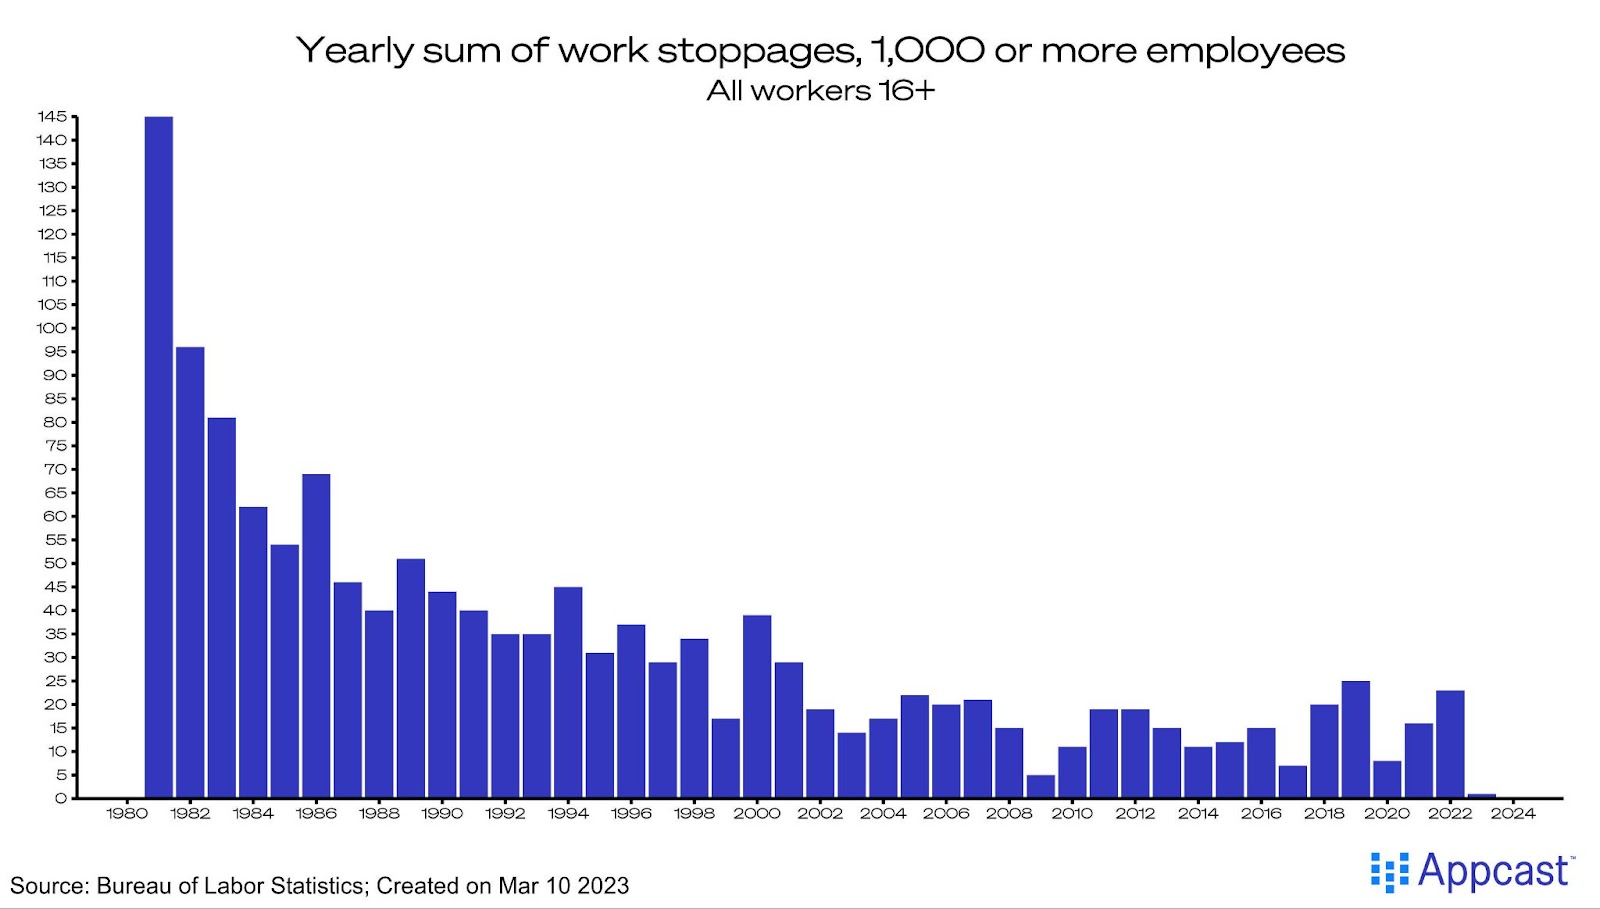 Yearly sum of worker stoppages including 1000 or more employees. Created on March 10, 2023 for Appcast. 